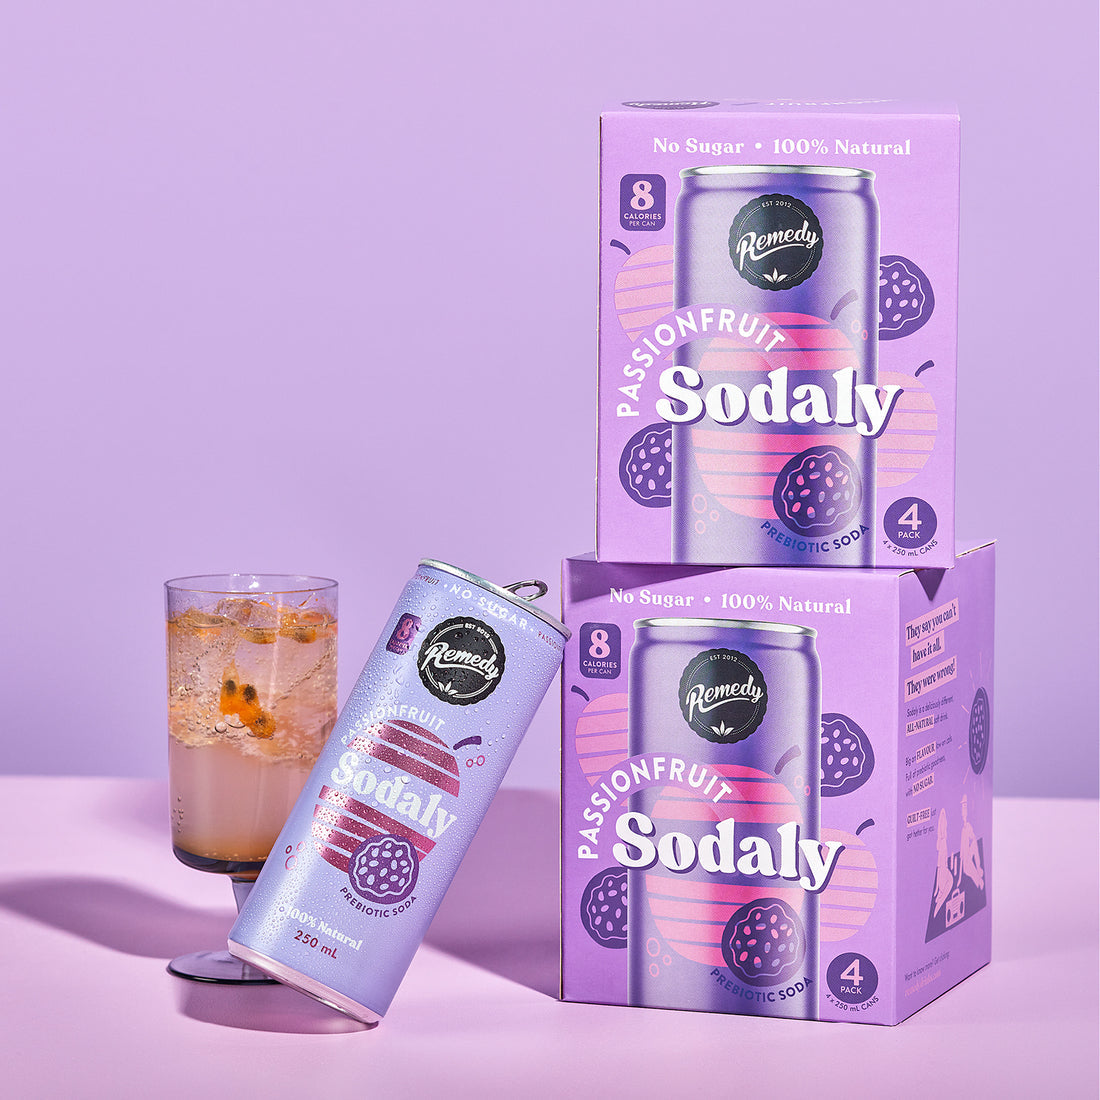 Remedy Sodaly Passionfruit (24 x 250ml)